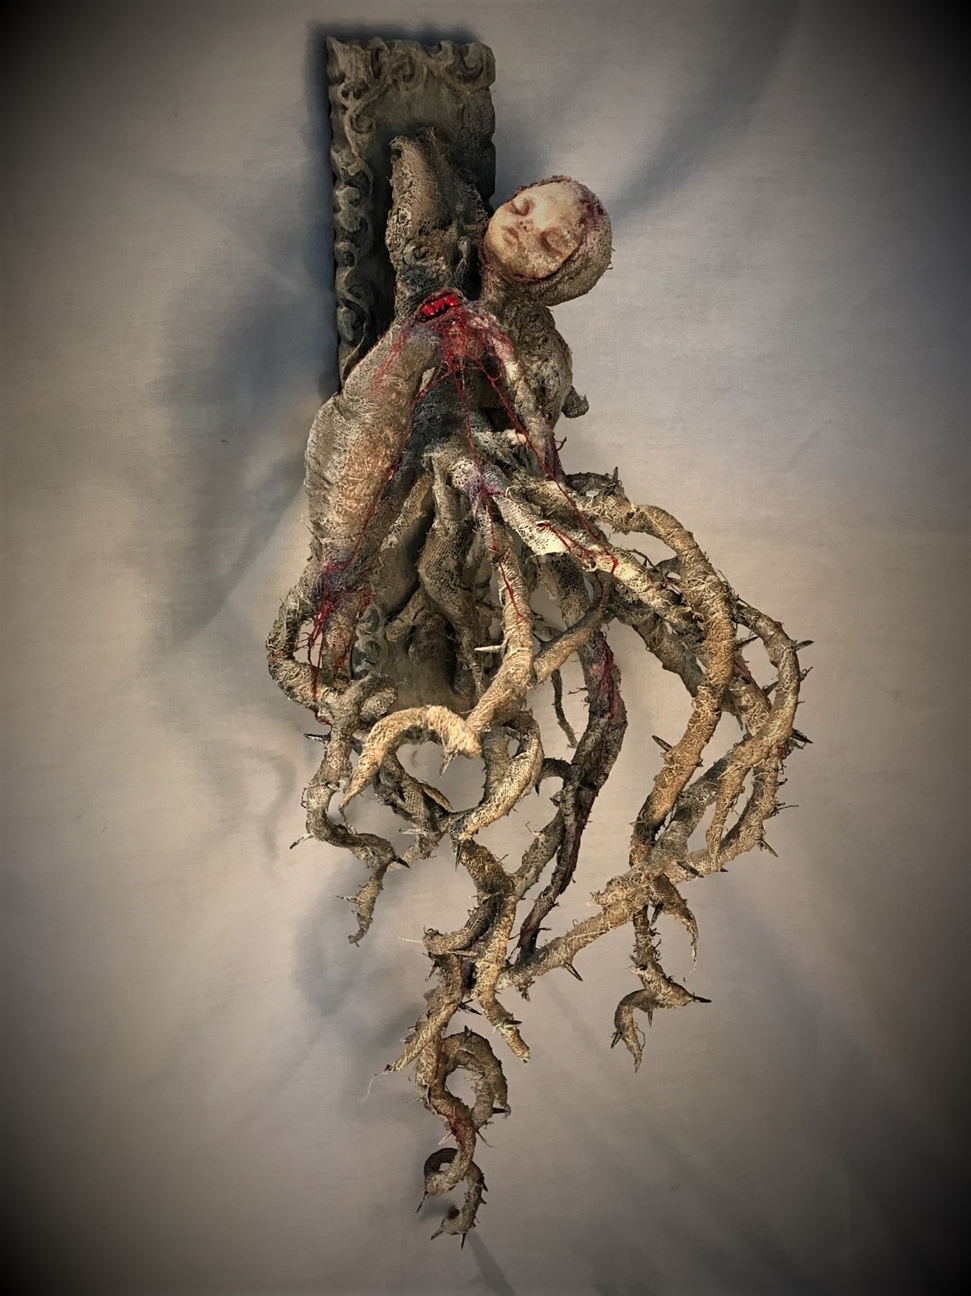 wounded woman bleeding heart mixed media assemblage sculpture made of porcelain, cloth mache & wood